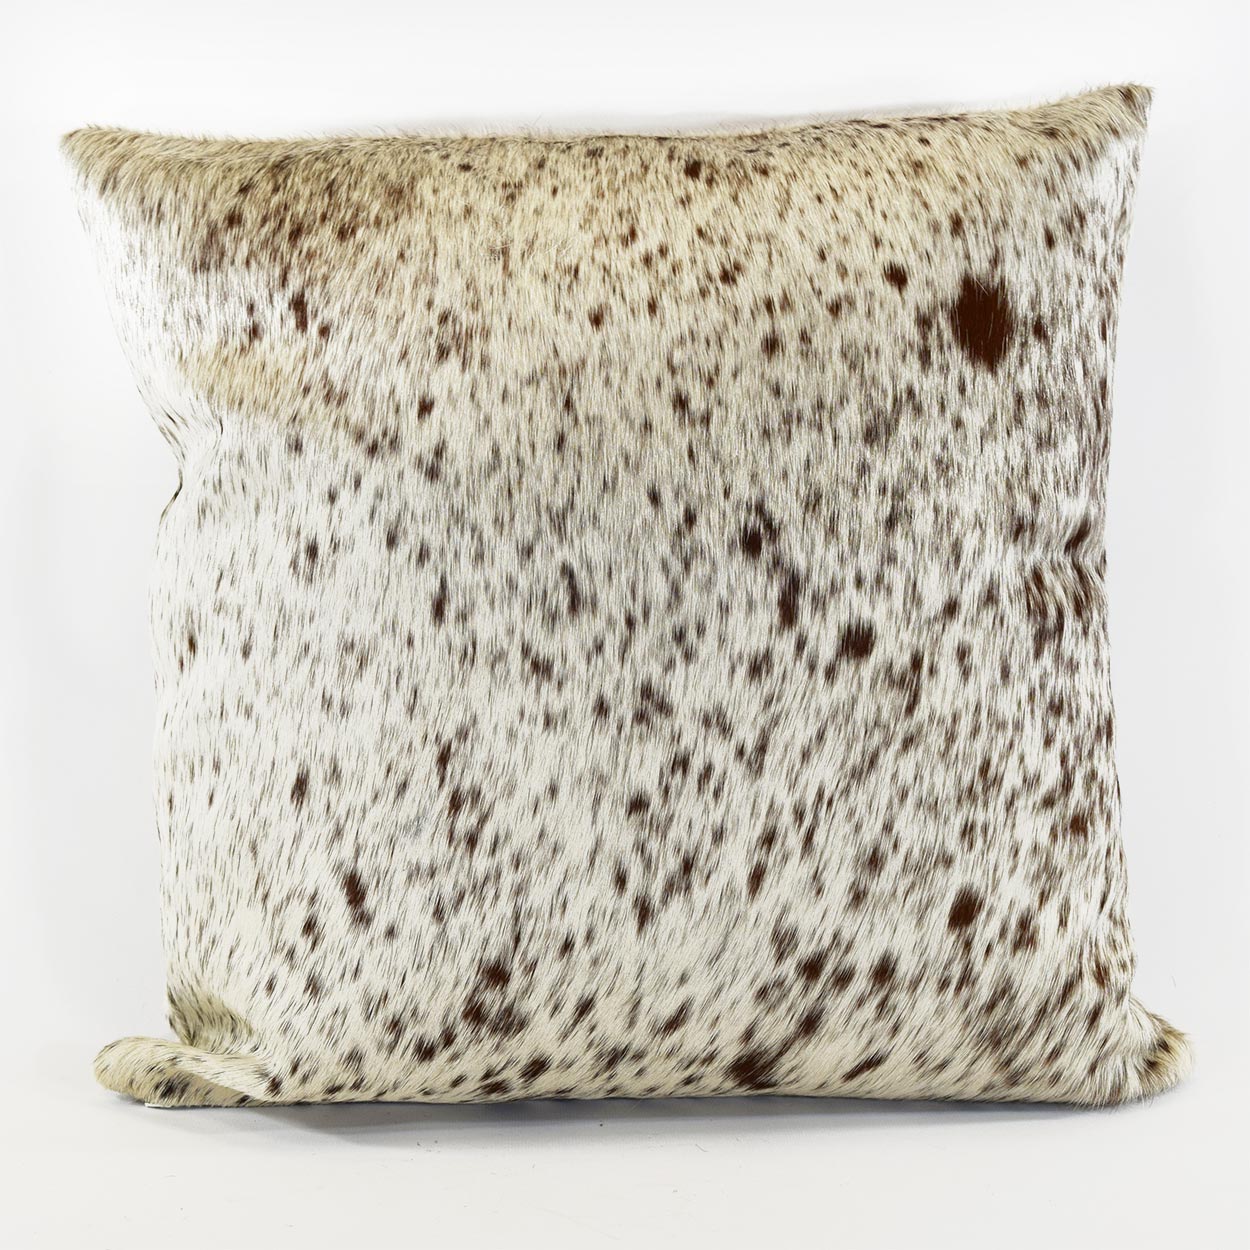 322064-2 - 20in x 20in Cowhide Pillow - Salt And Pepper Brown - Mostly White